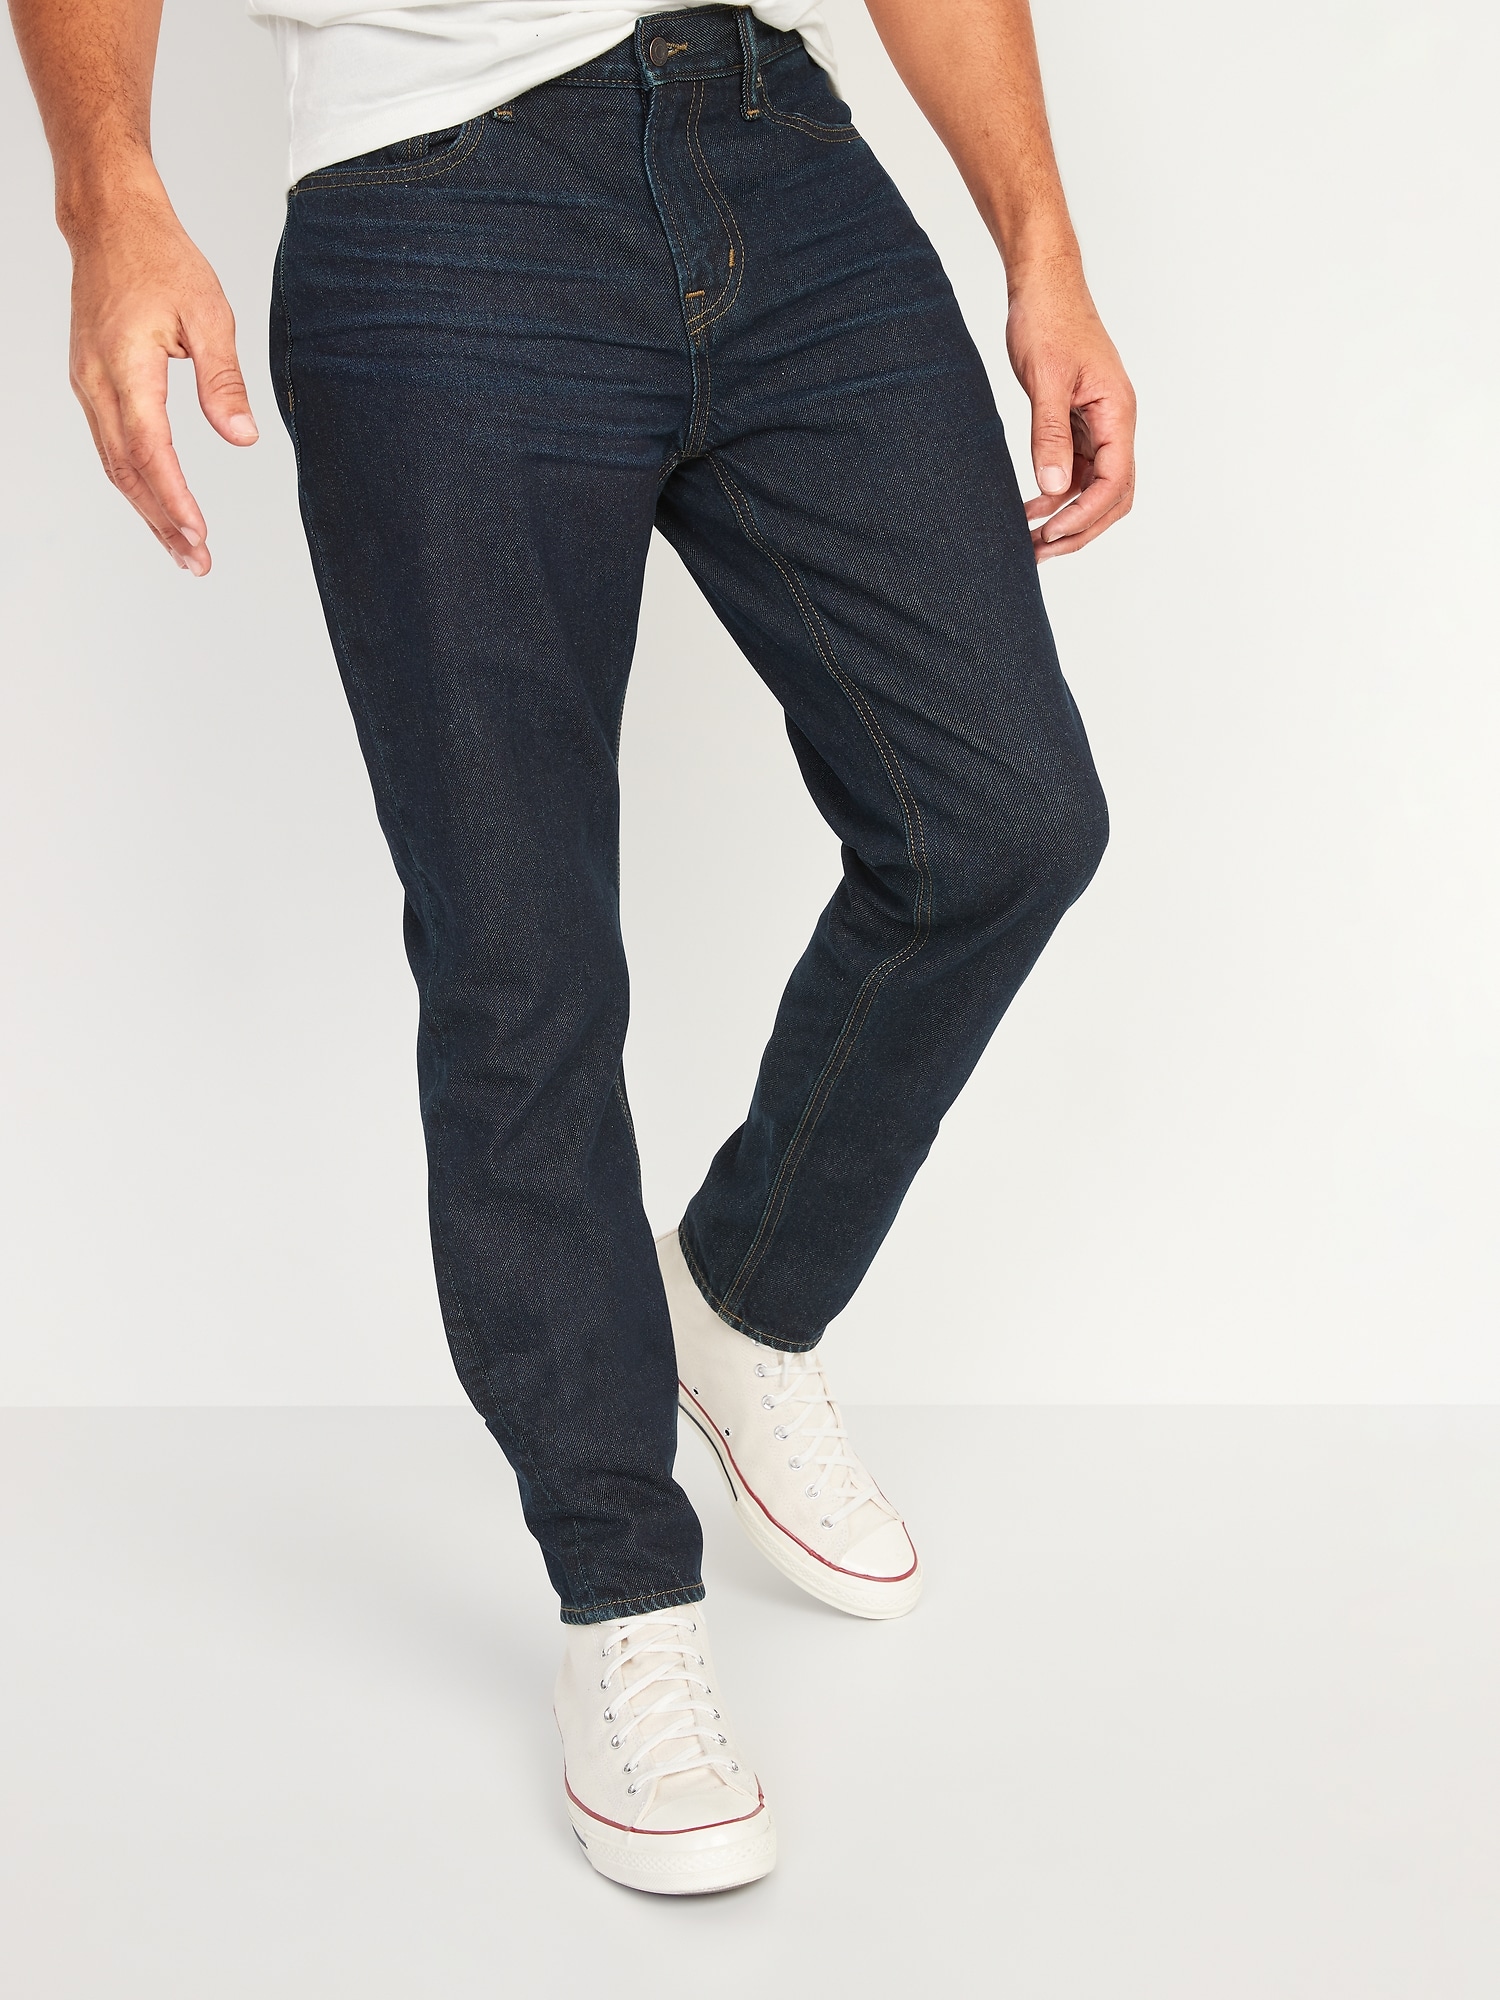 100% Cotton, Non-Stretch Jeans & Clothing